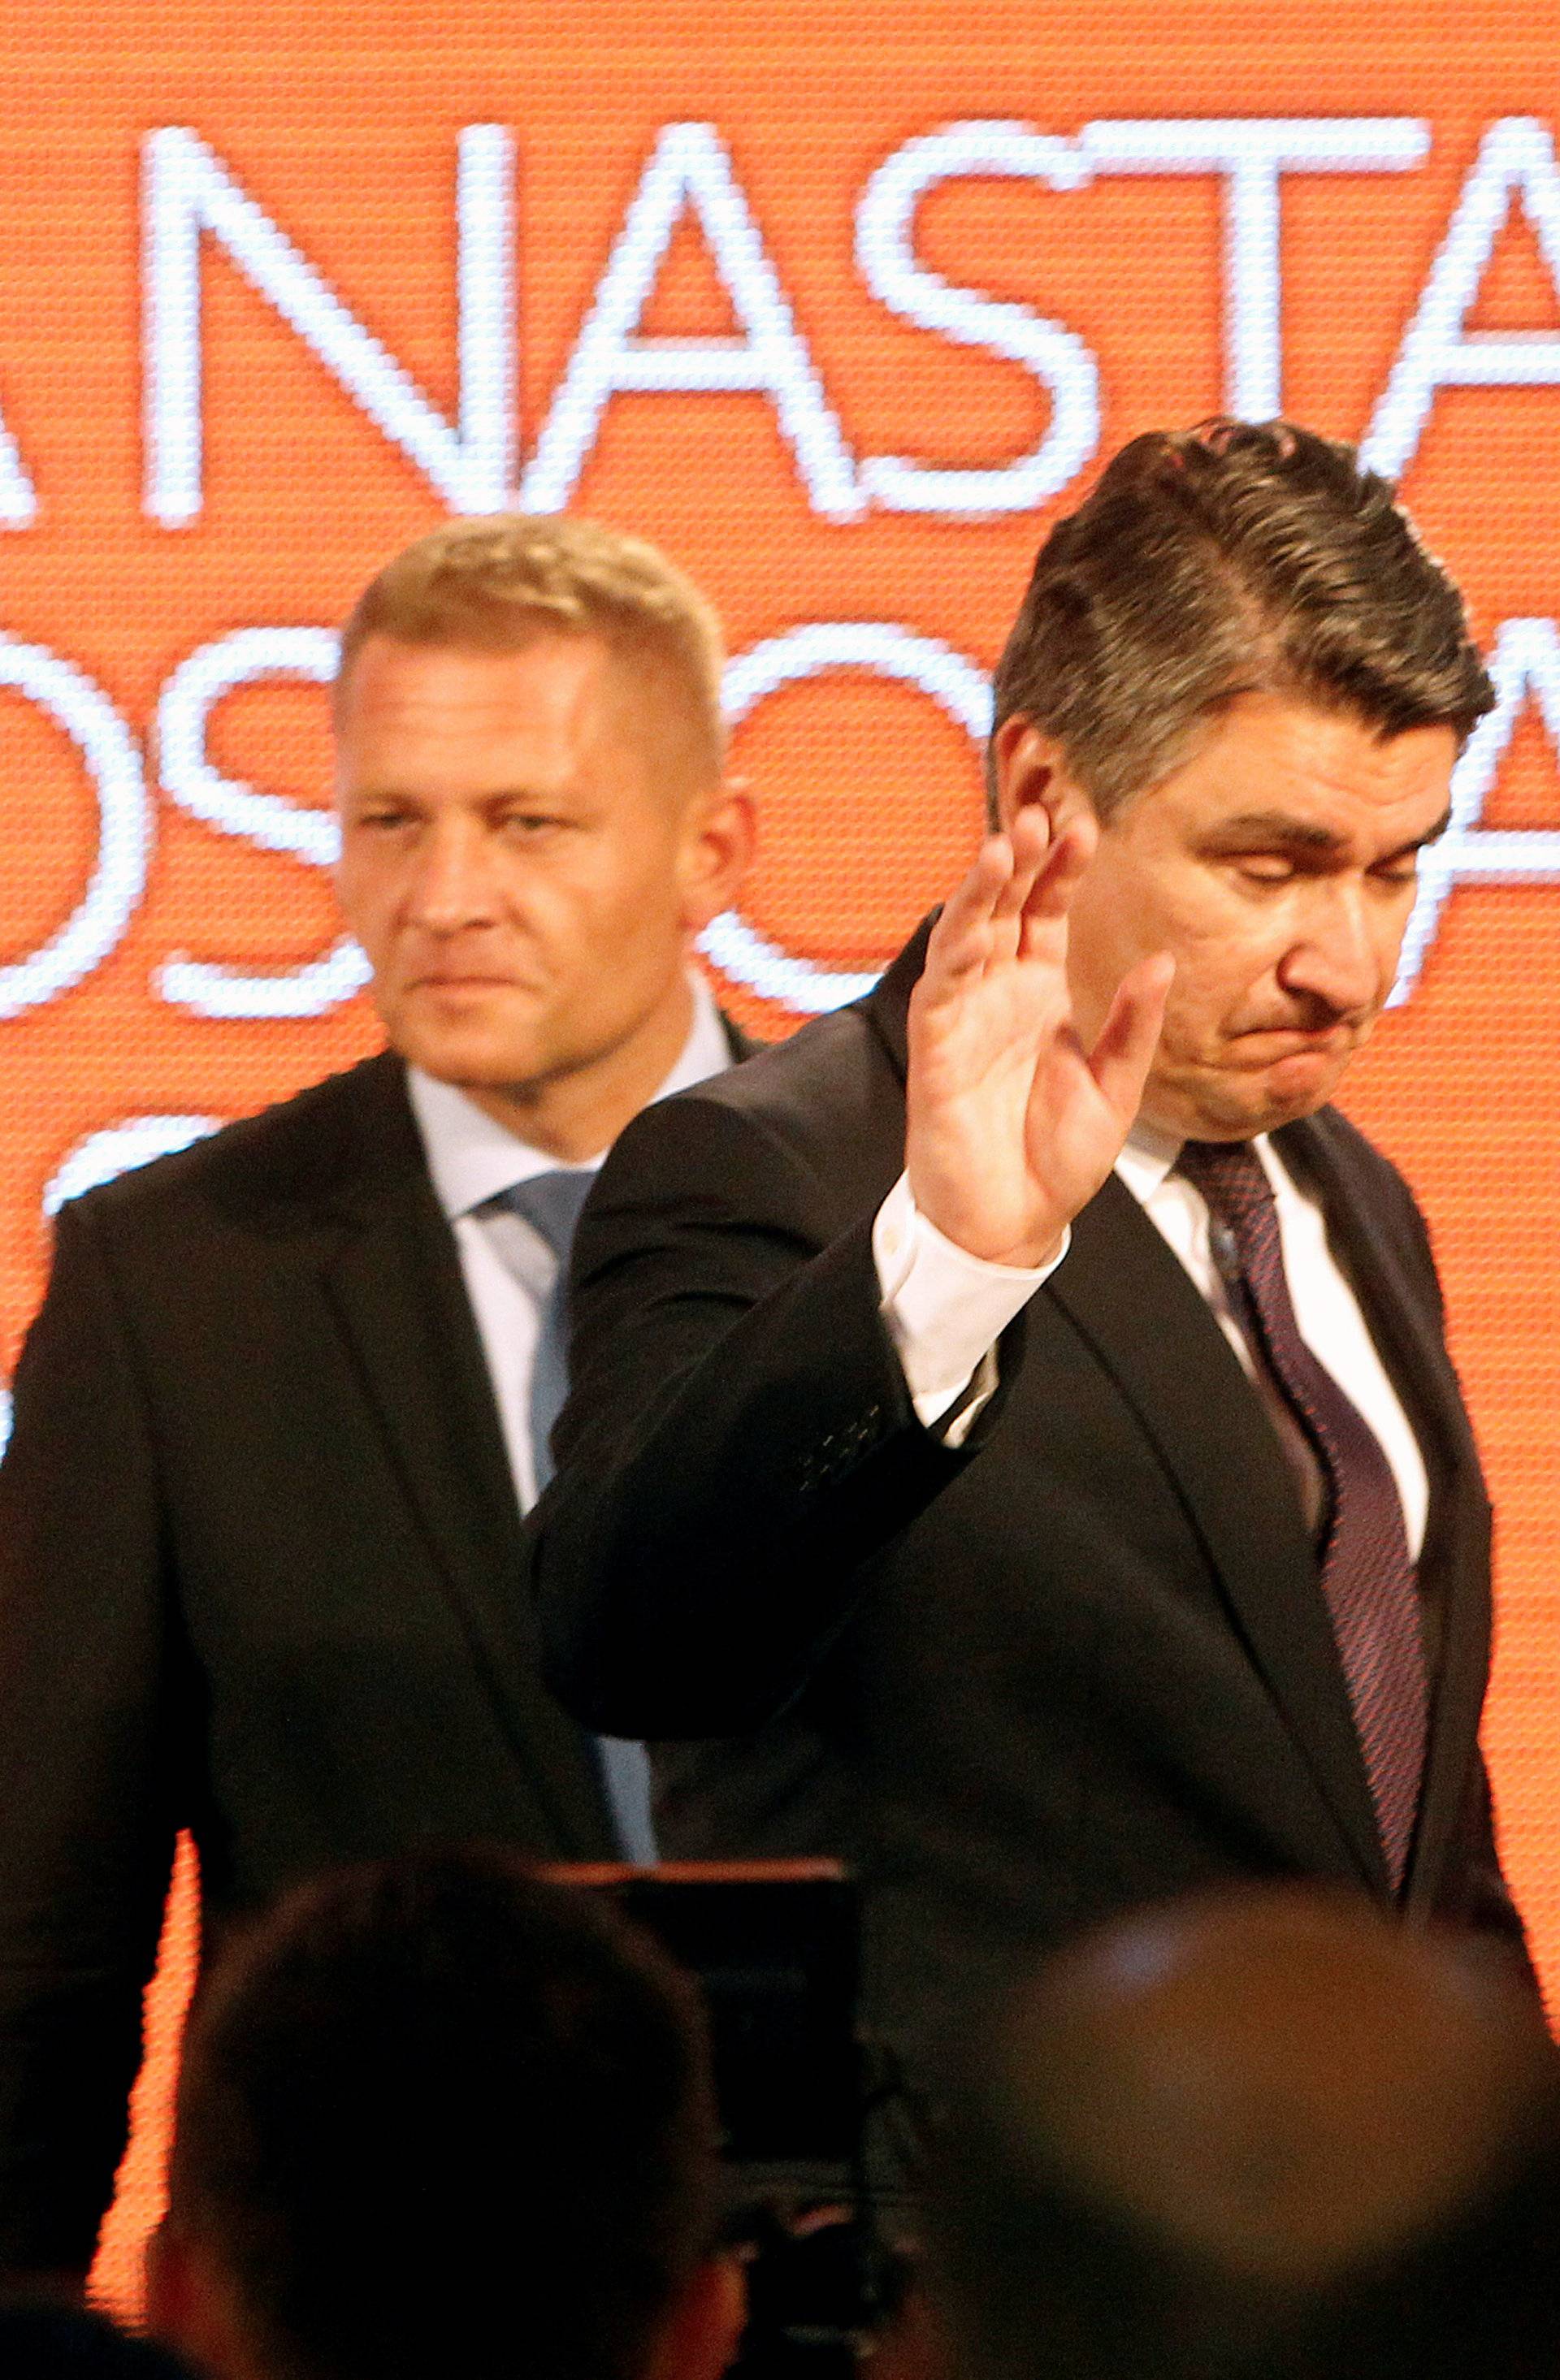 Zoran Milanovic, president of Social Democratic Party (SDP), reacts at a press conference after a parliamentary election in Zagreb